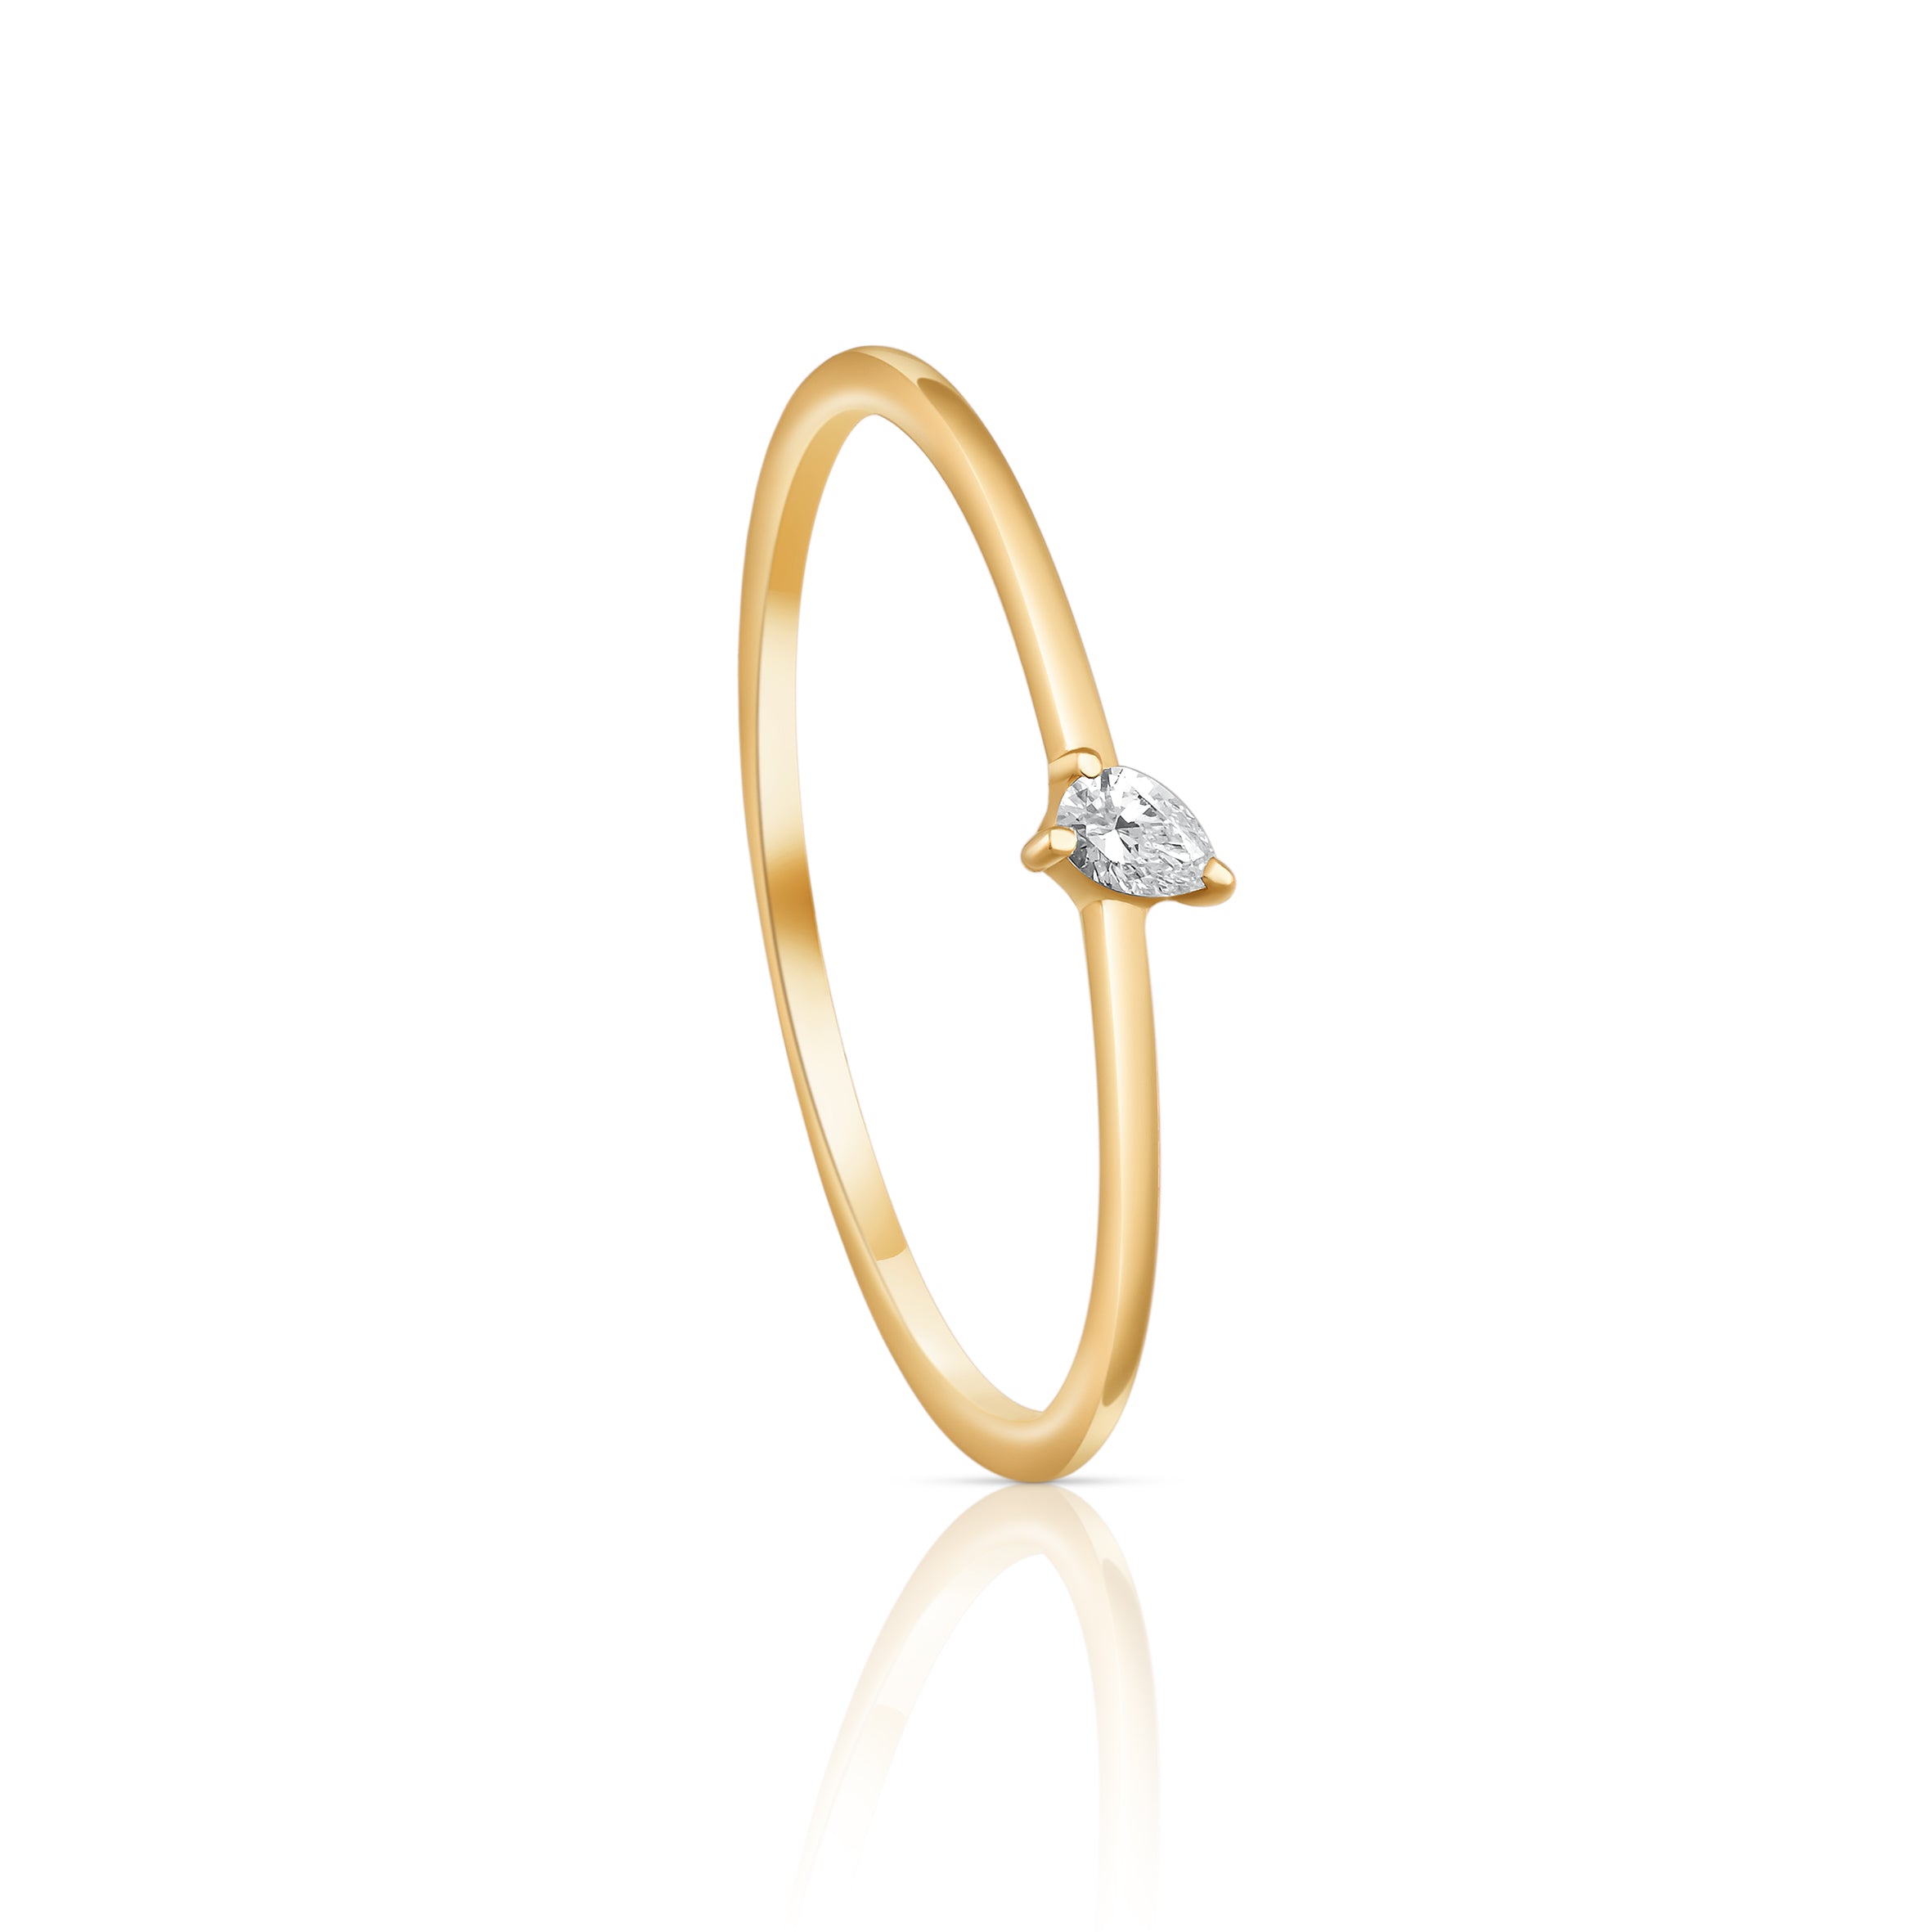 Central Oval Diamond Rings in Yellow 18 K Gold - S-R176SON